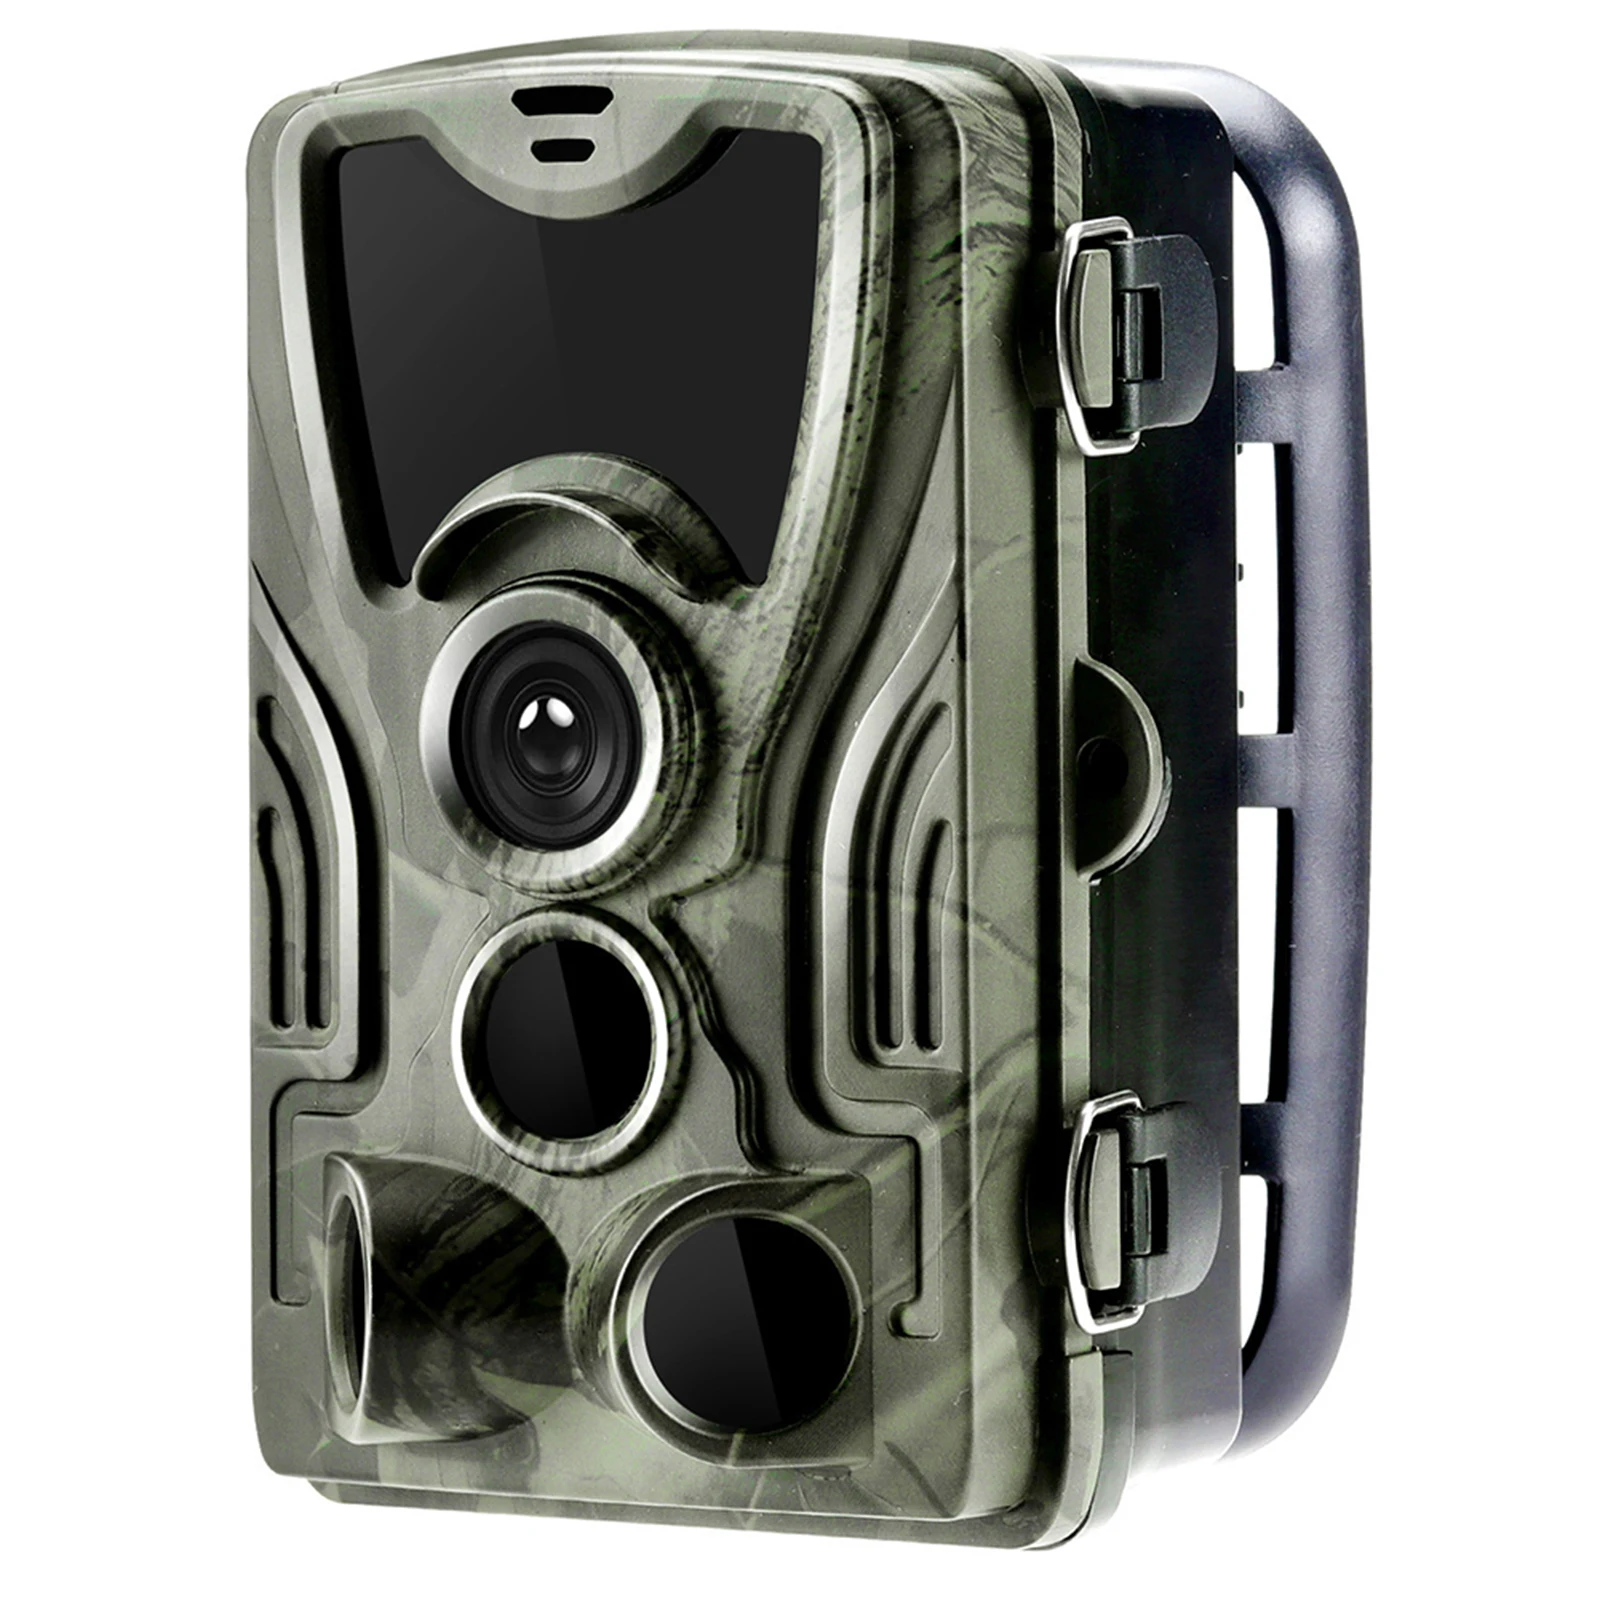 

Reliable 20MP Hunting Trail Camera High Definition Video Superb Night Vision Driven to Provide Top notch Home Security